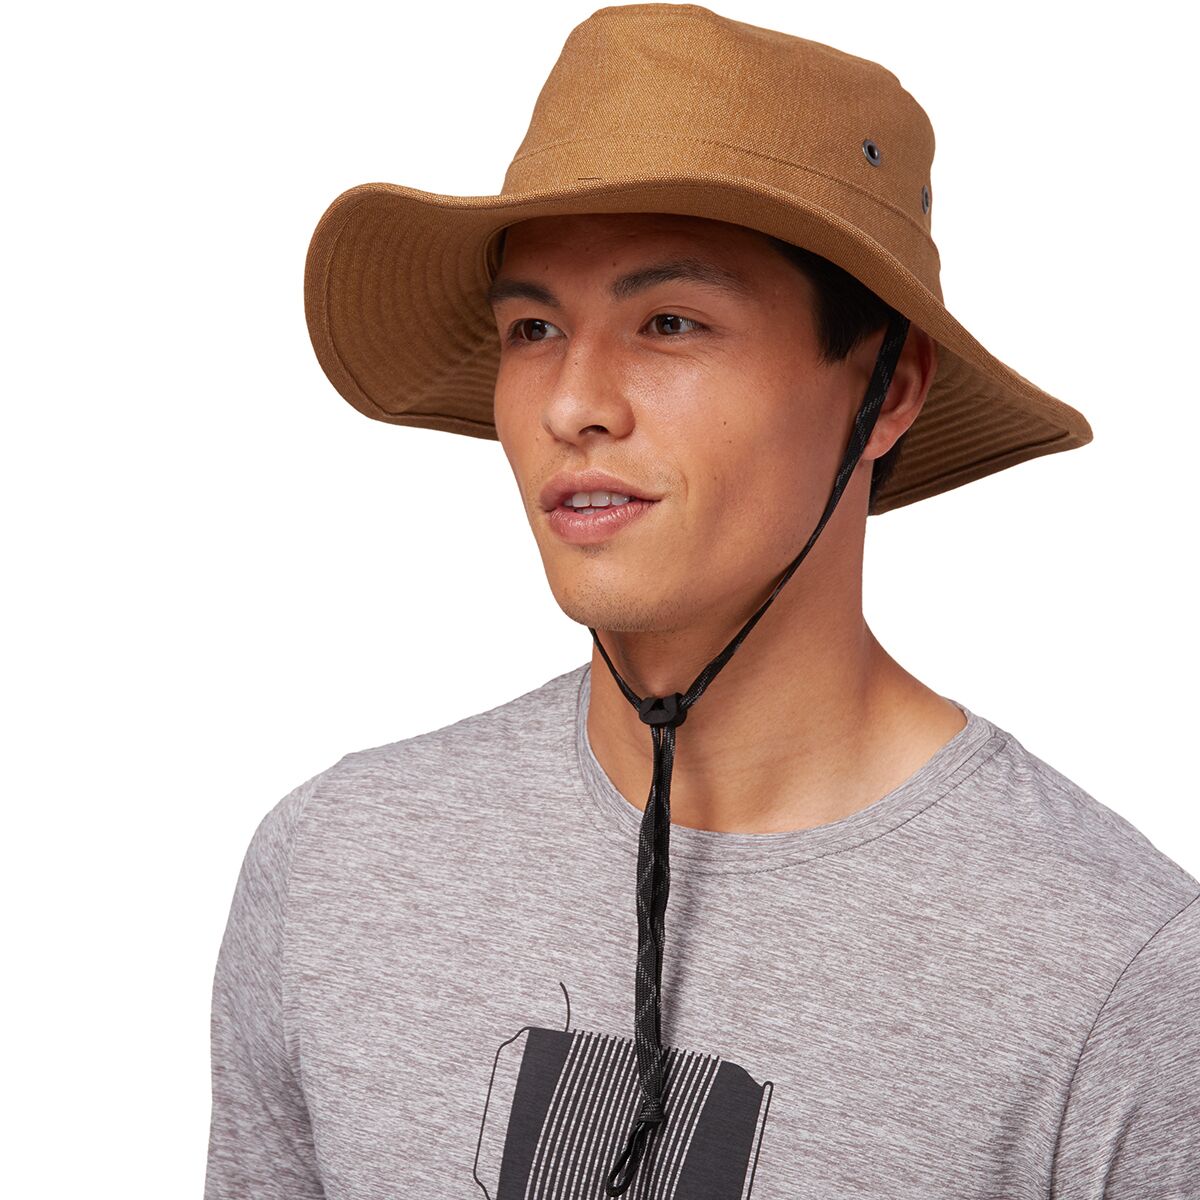 Patagonia The Forge Hat - Men's - Accessories